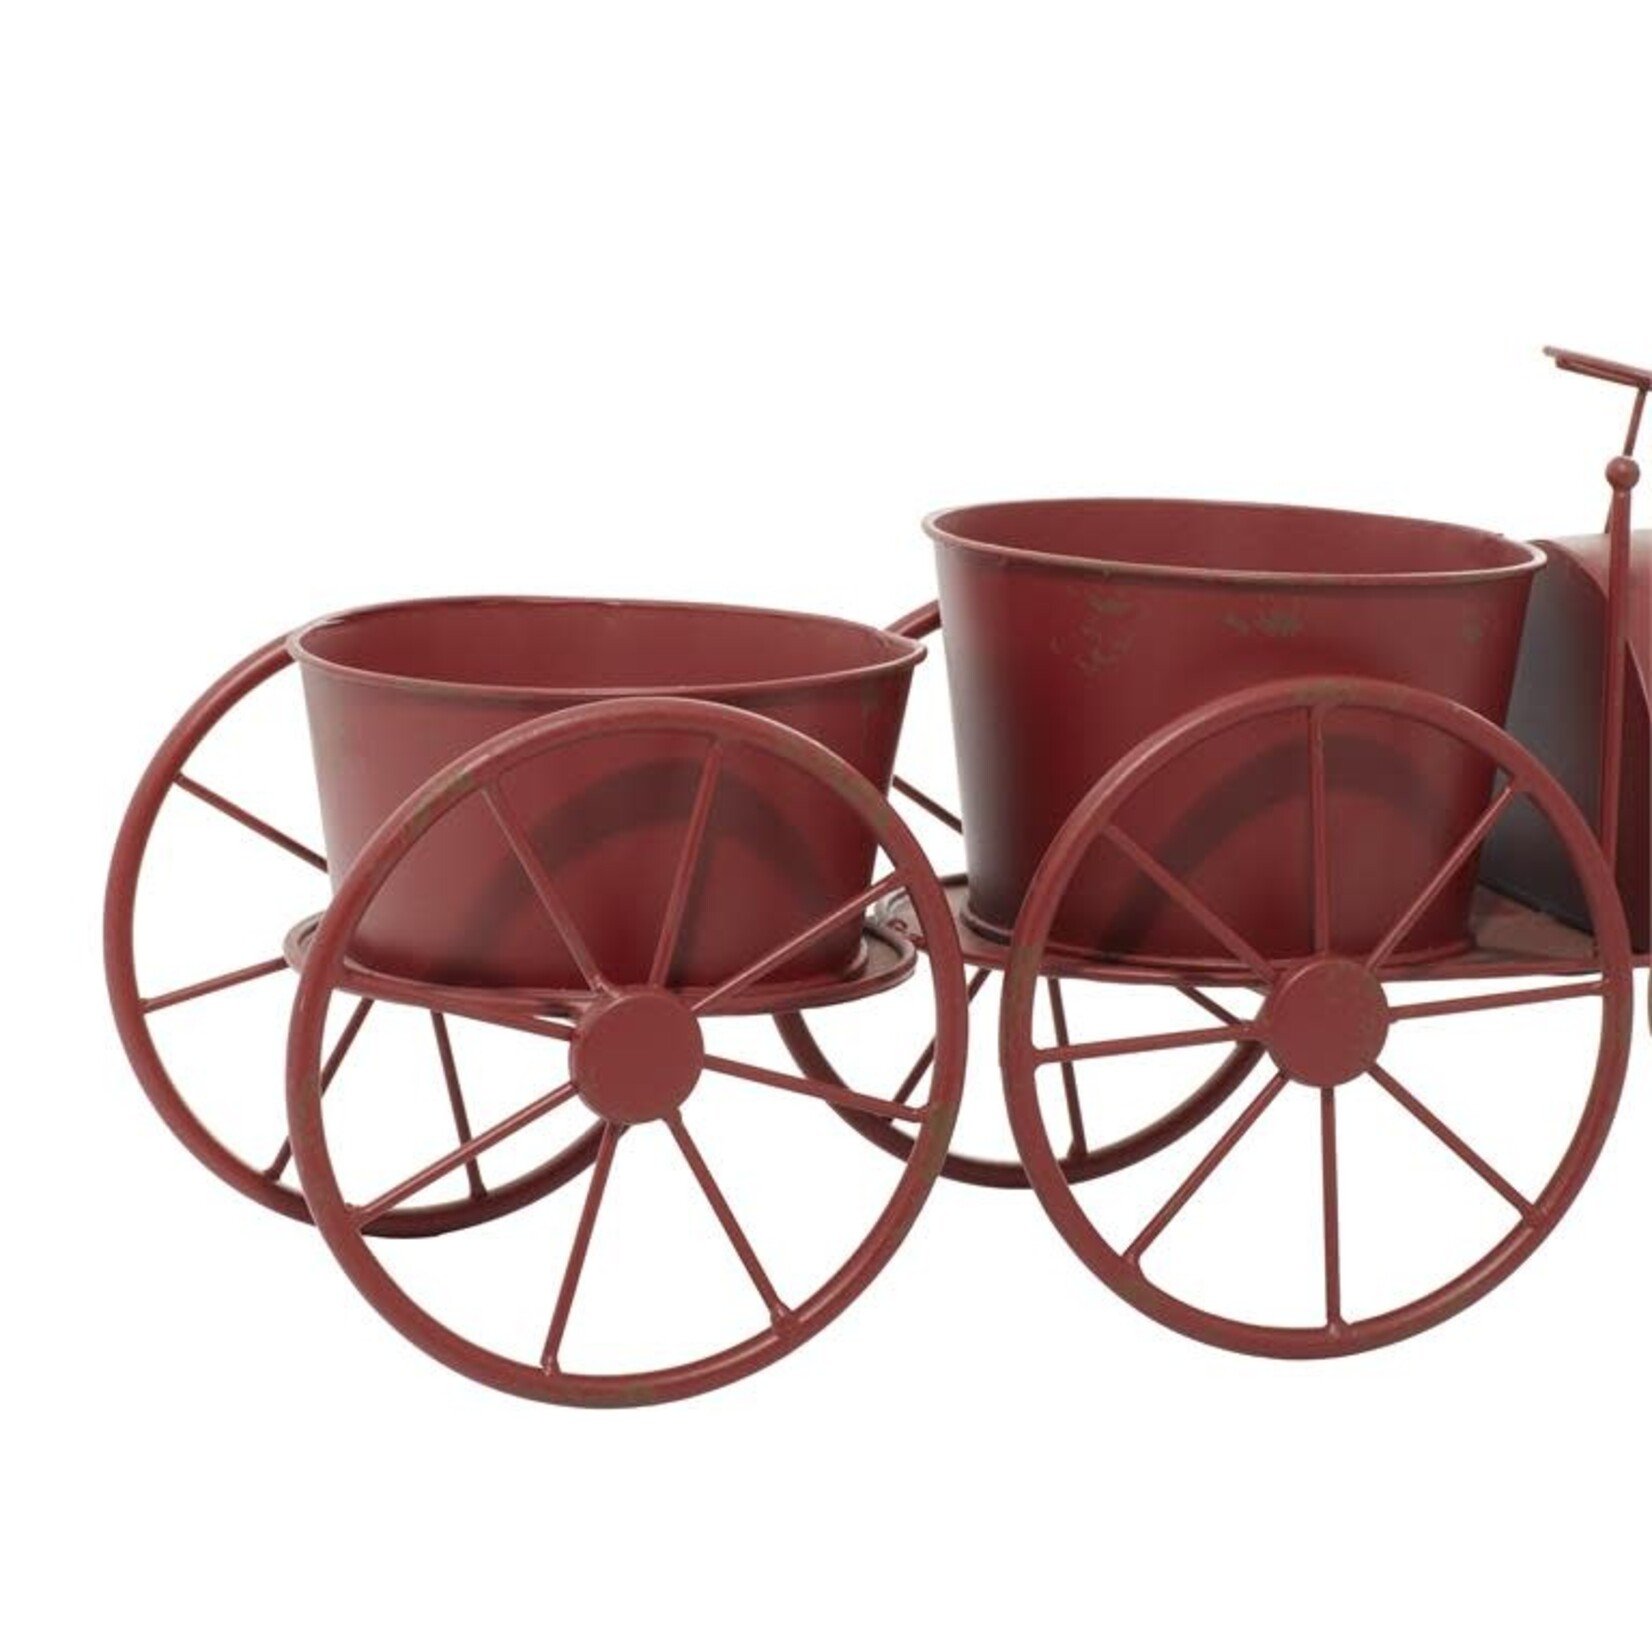 60% off was $90 now $36.00, 10”H X 22” RED METAL TRUCK PLANTER